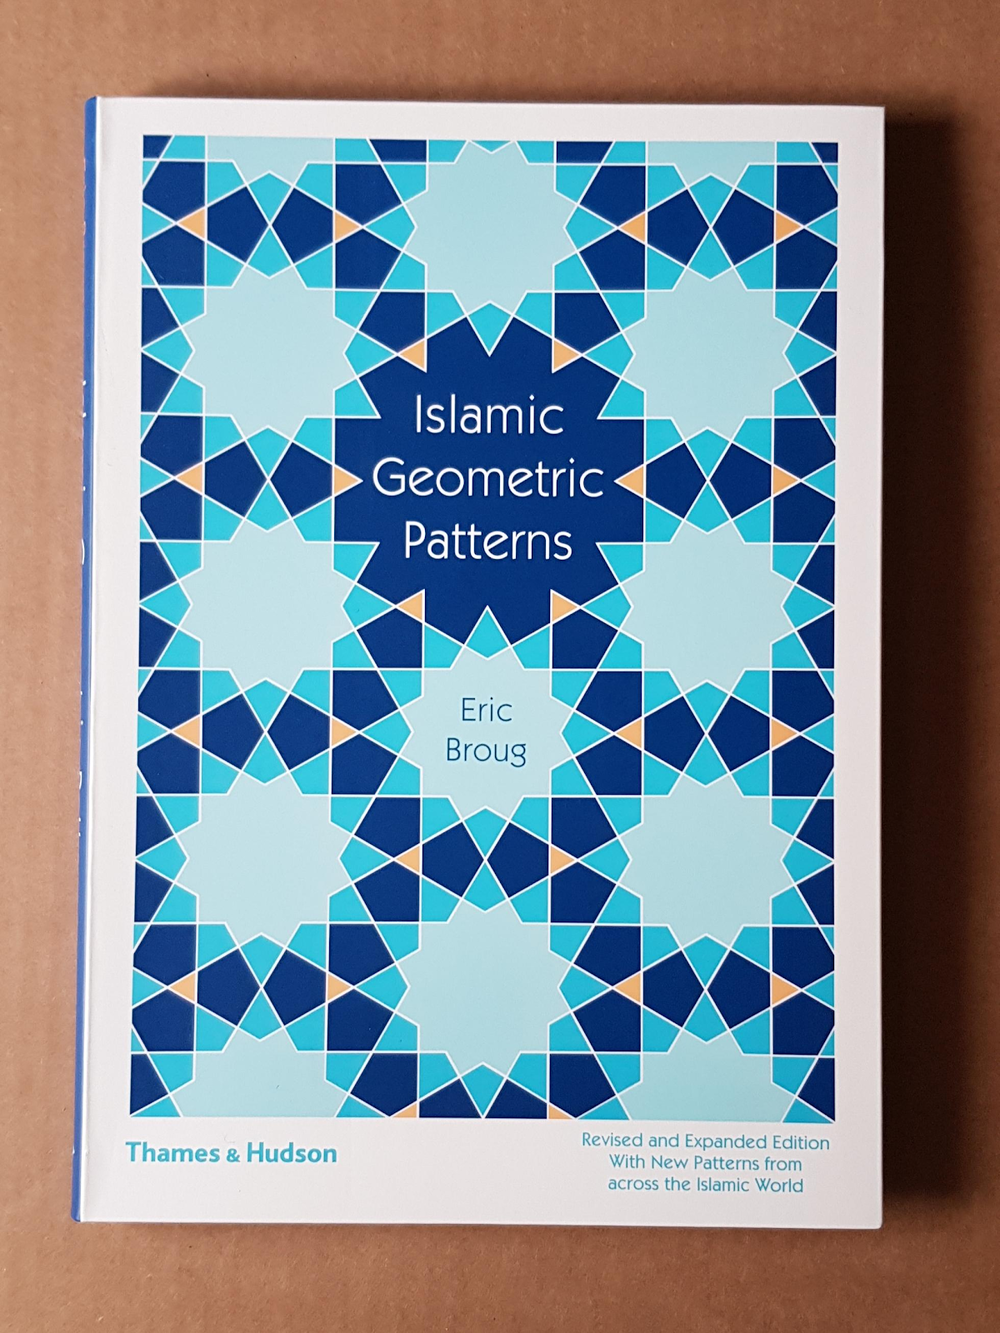 Eric Broug specialises in Islamic design, as seen on the cover of his book.